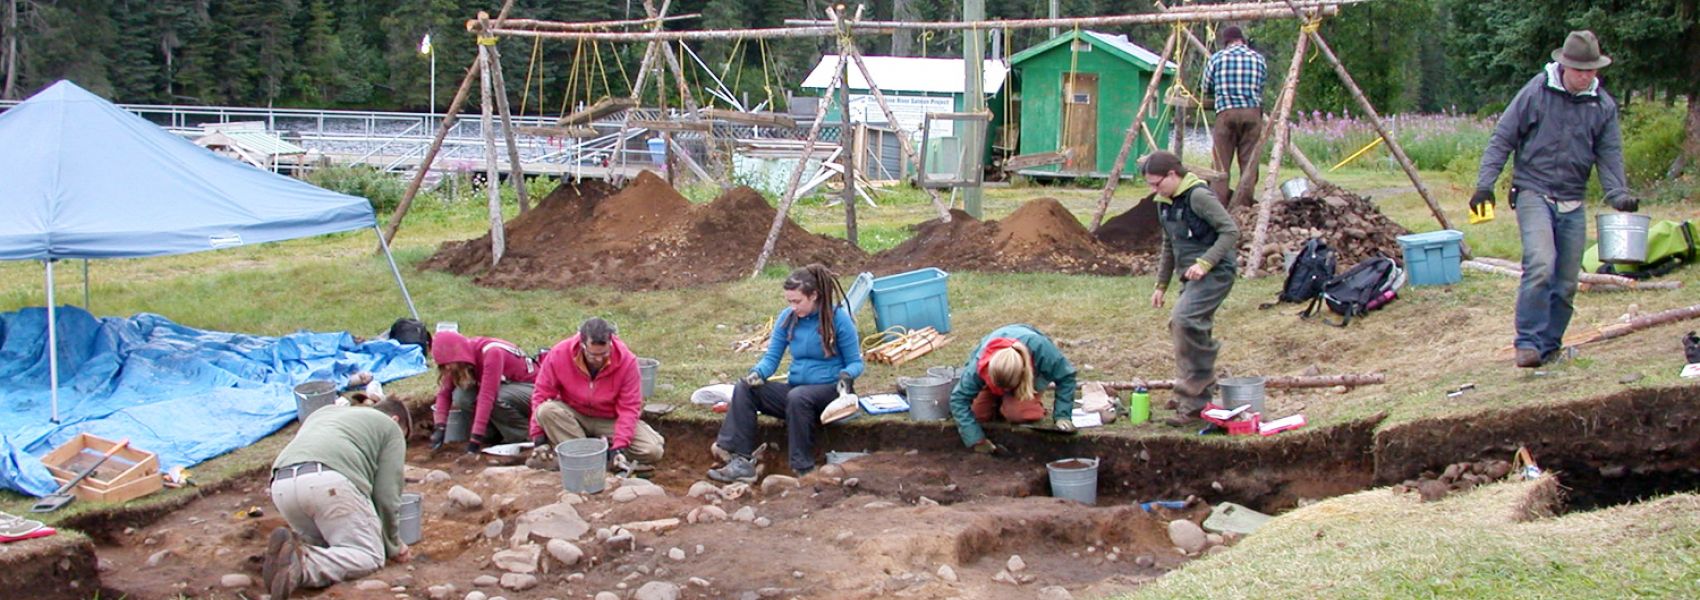 Anthropology students studying in the field